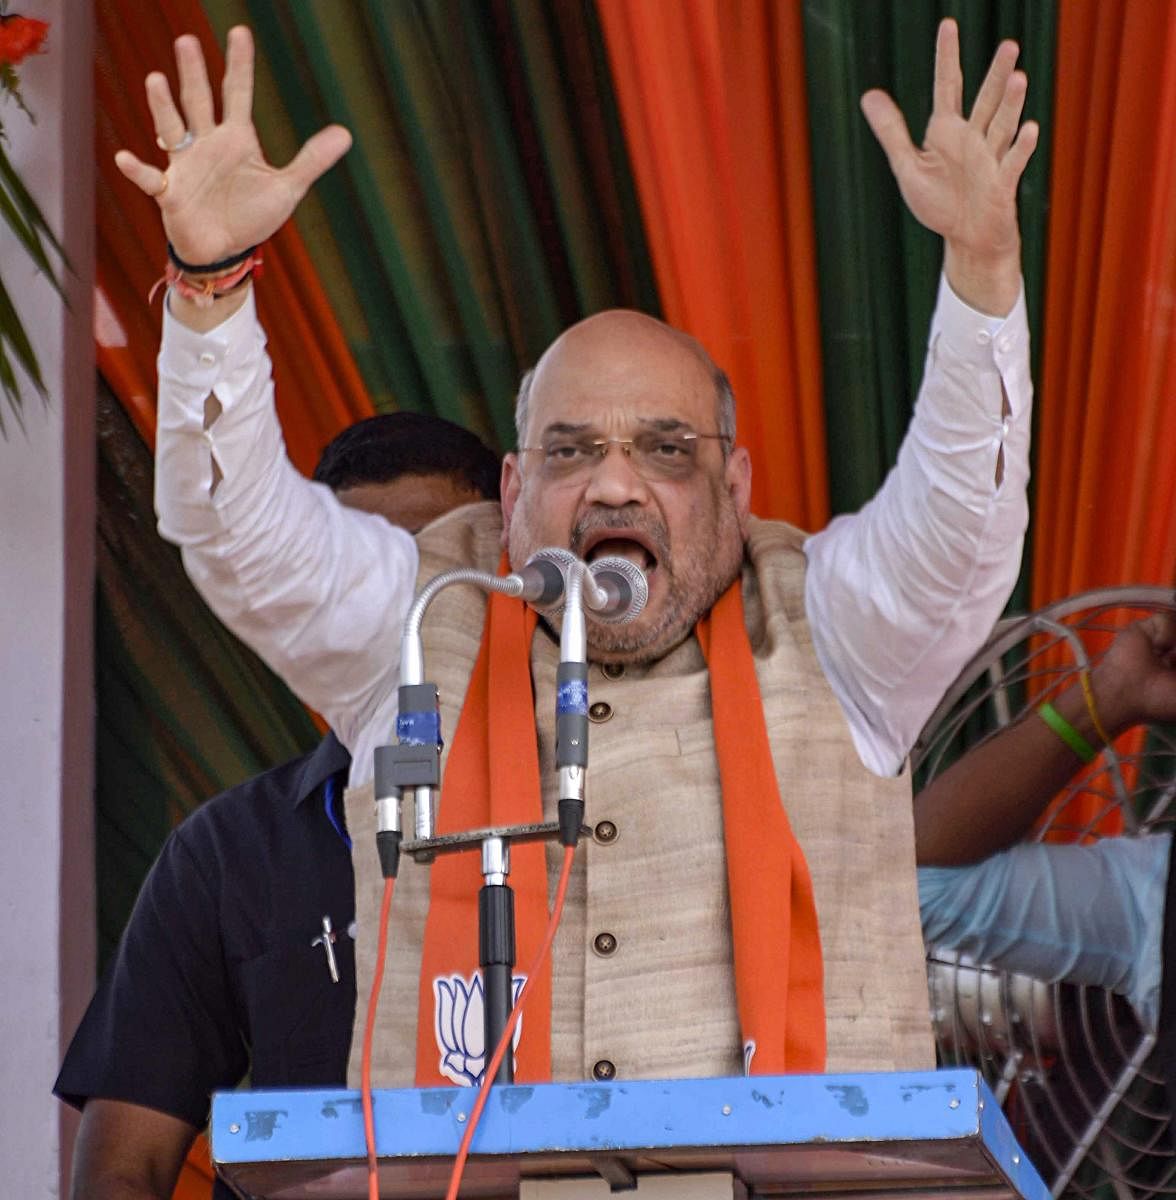 BJP national president Amit Shah during a campaign for Lok Sabha elections, in the Alipurduar district of West Bengal on March 29. PTI